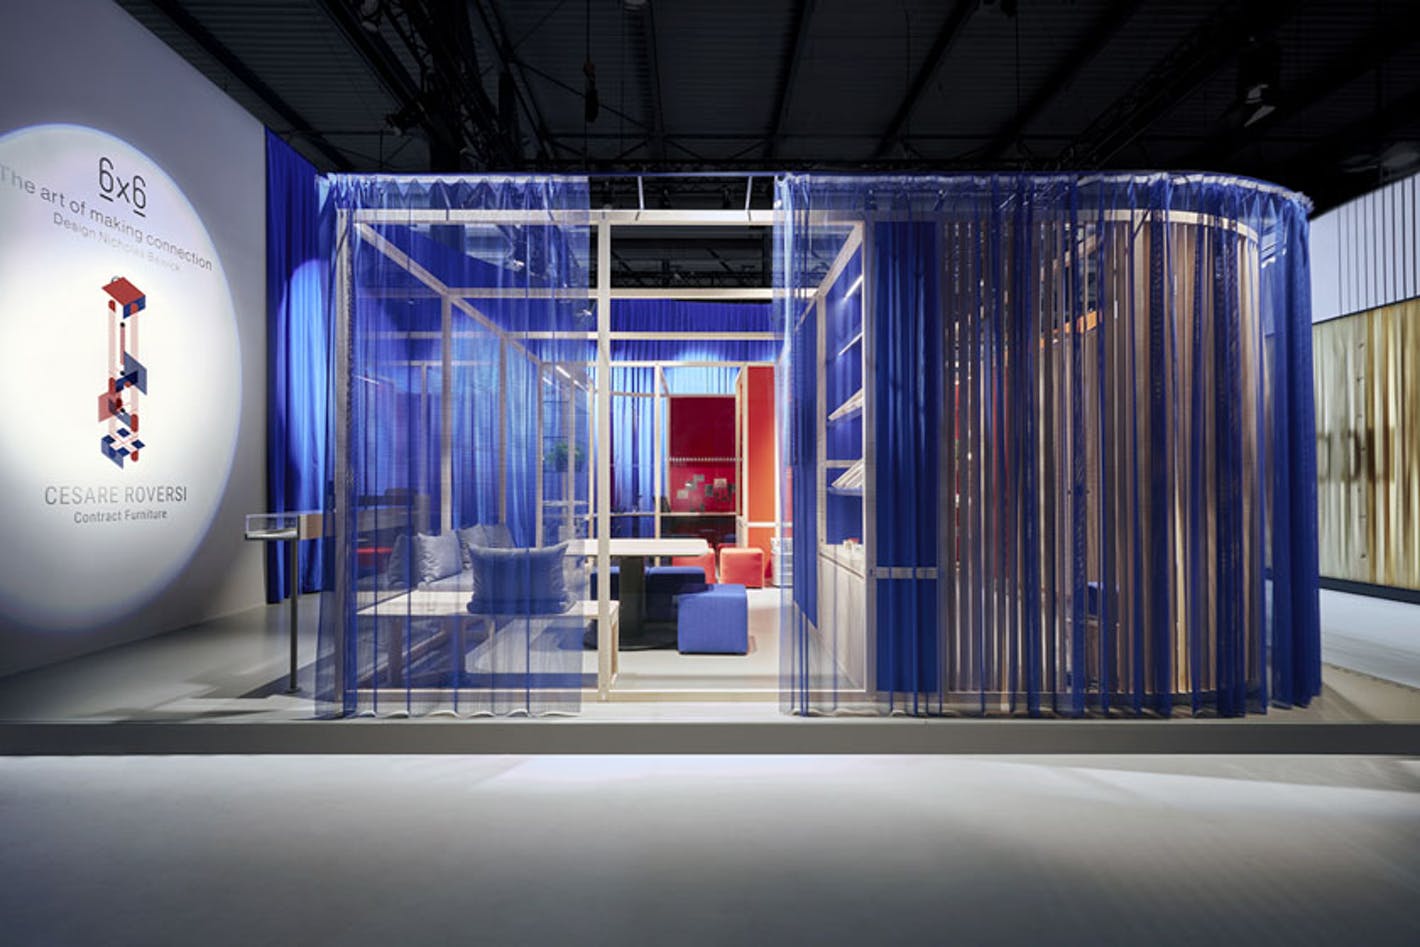 living room gallery installation surrounded by translucent blue fabric